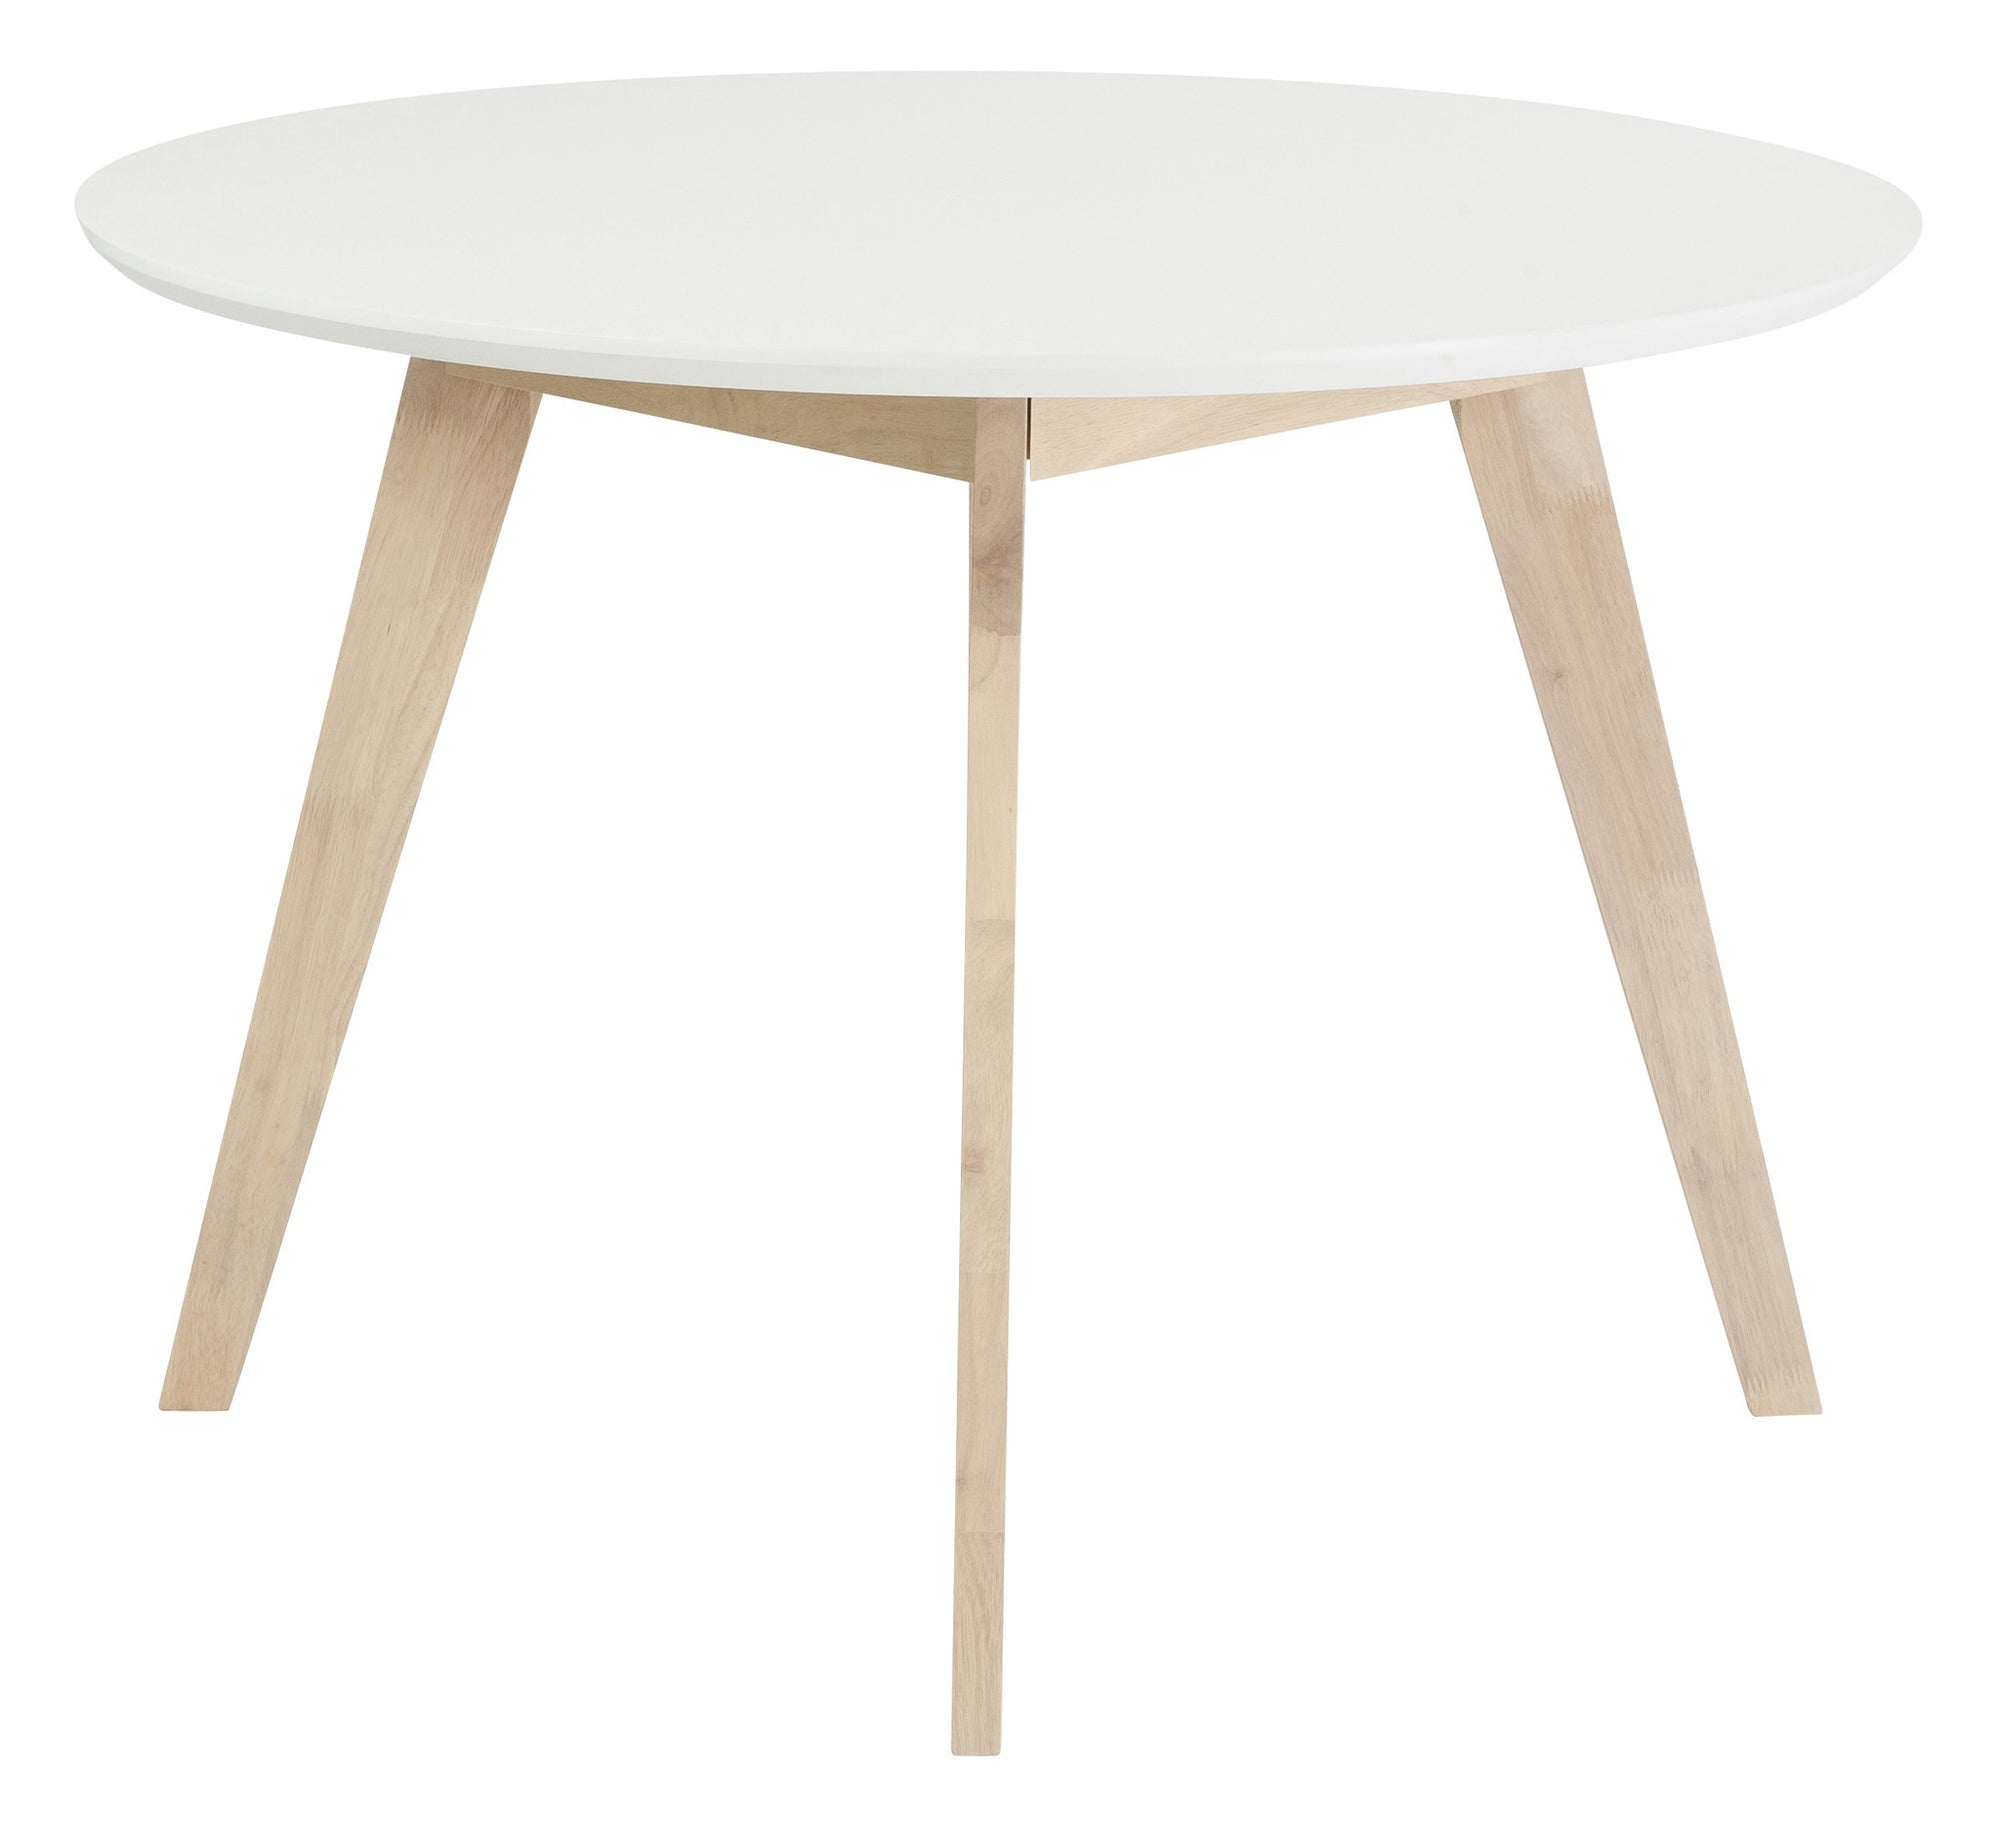 Montague Round Dining Table White/Nat